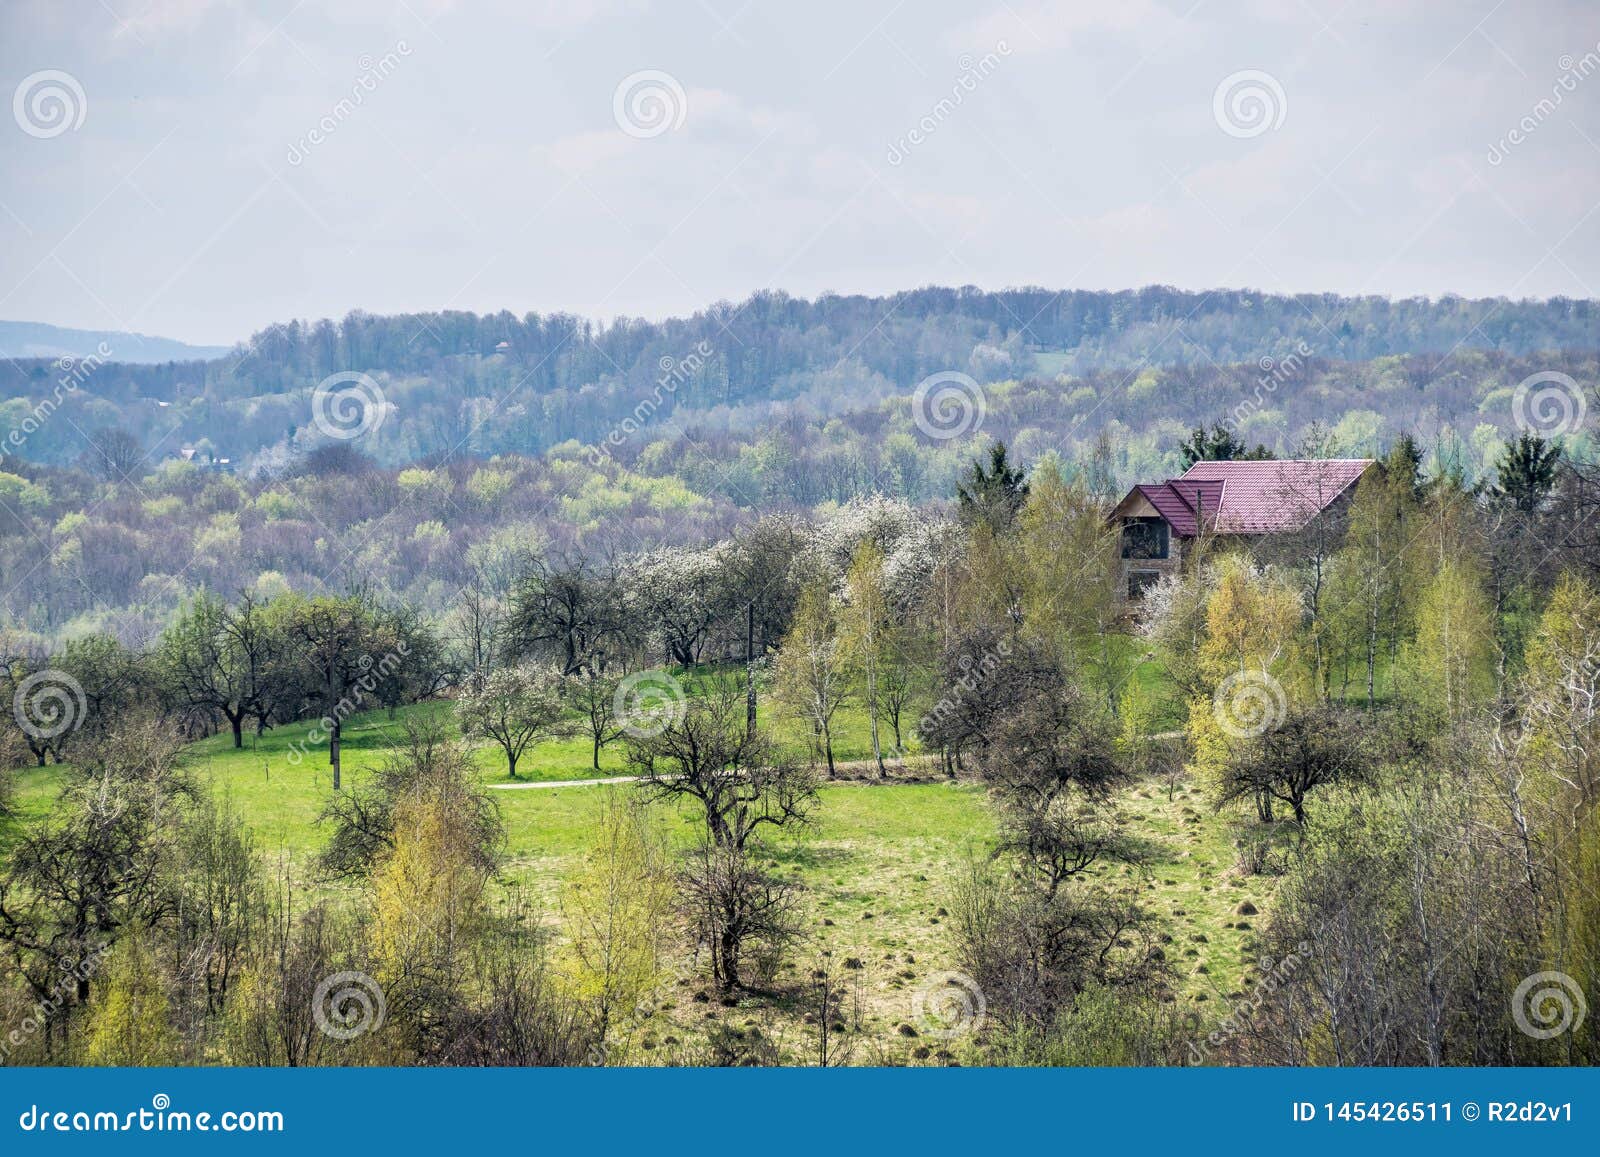 Cottage In The Forest. Awakening Of Nature In Spring Stock Image